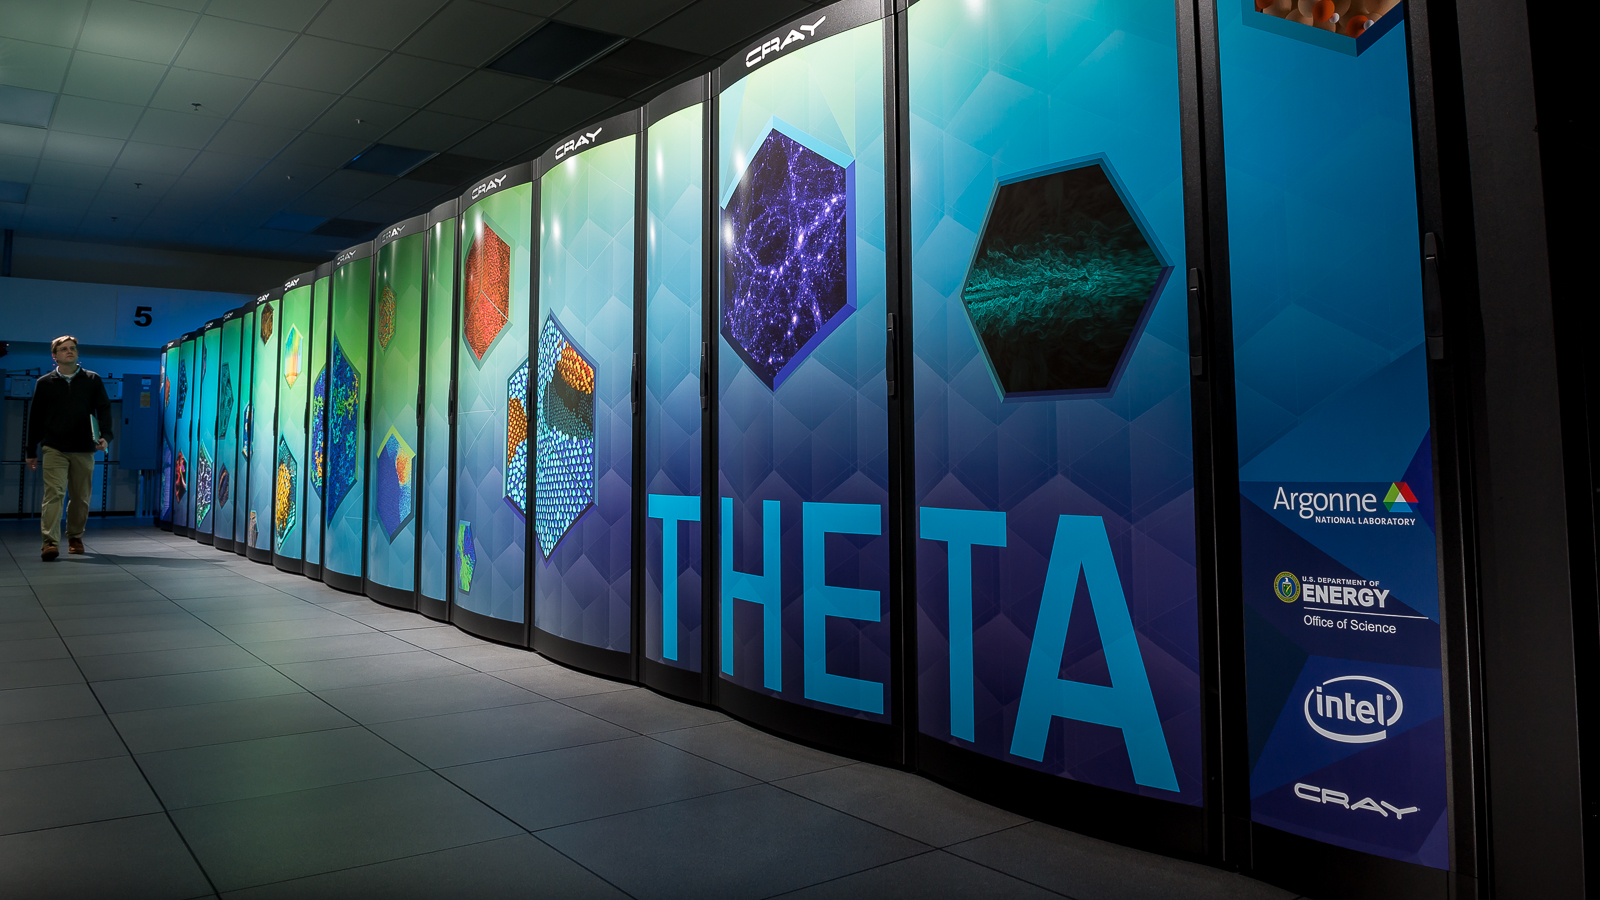 Argonne researchers are using the Theta supercomputer to model potential drug candidates that could serve as antivirals against COVID-19. (Image by Argonne National Laboratory.)